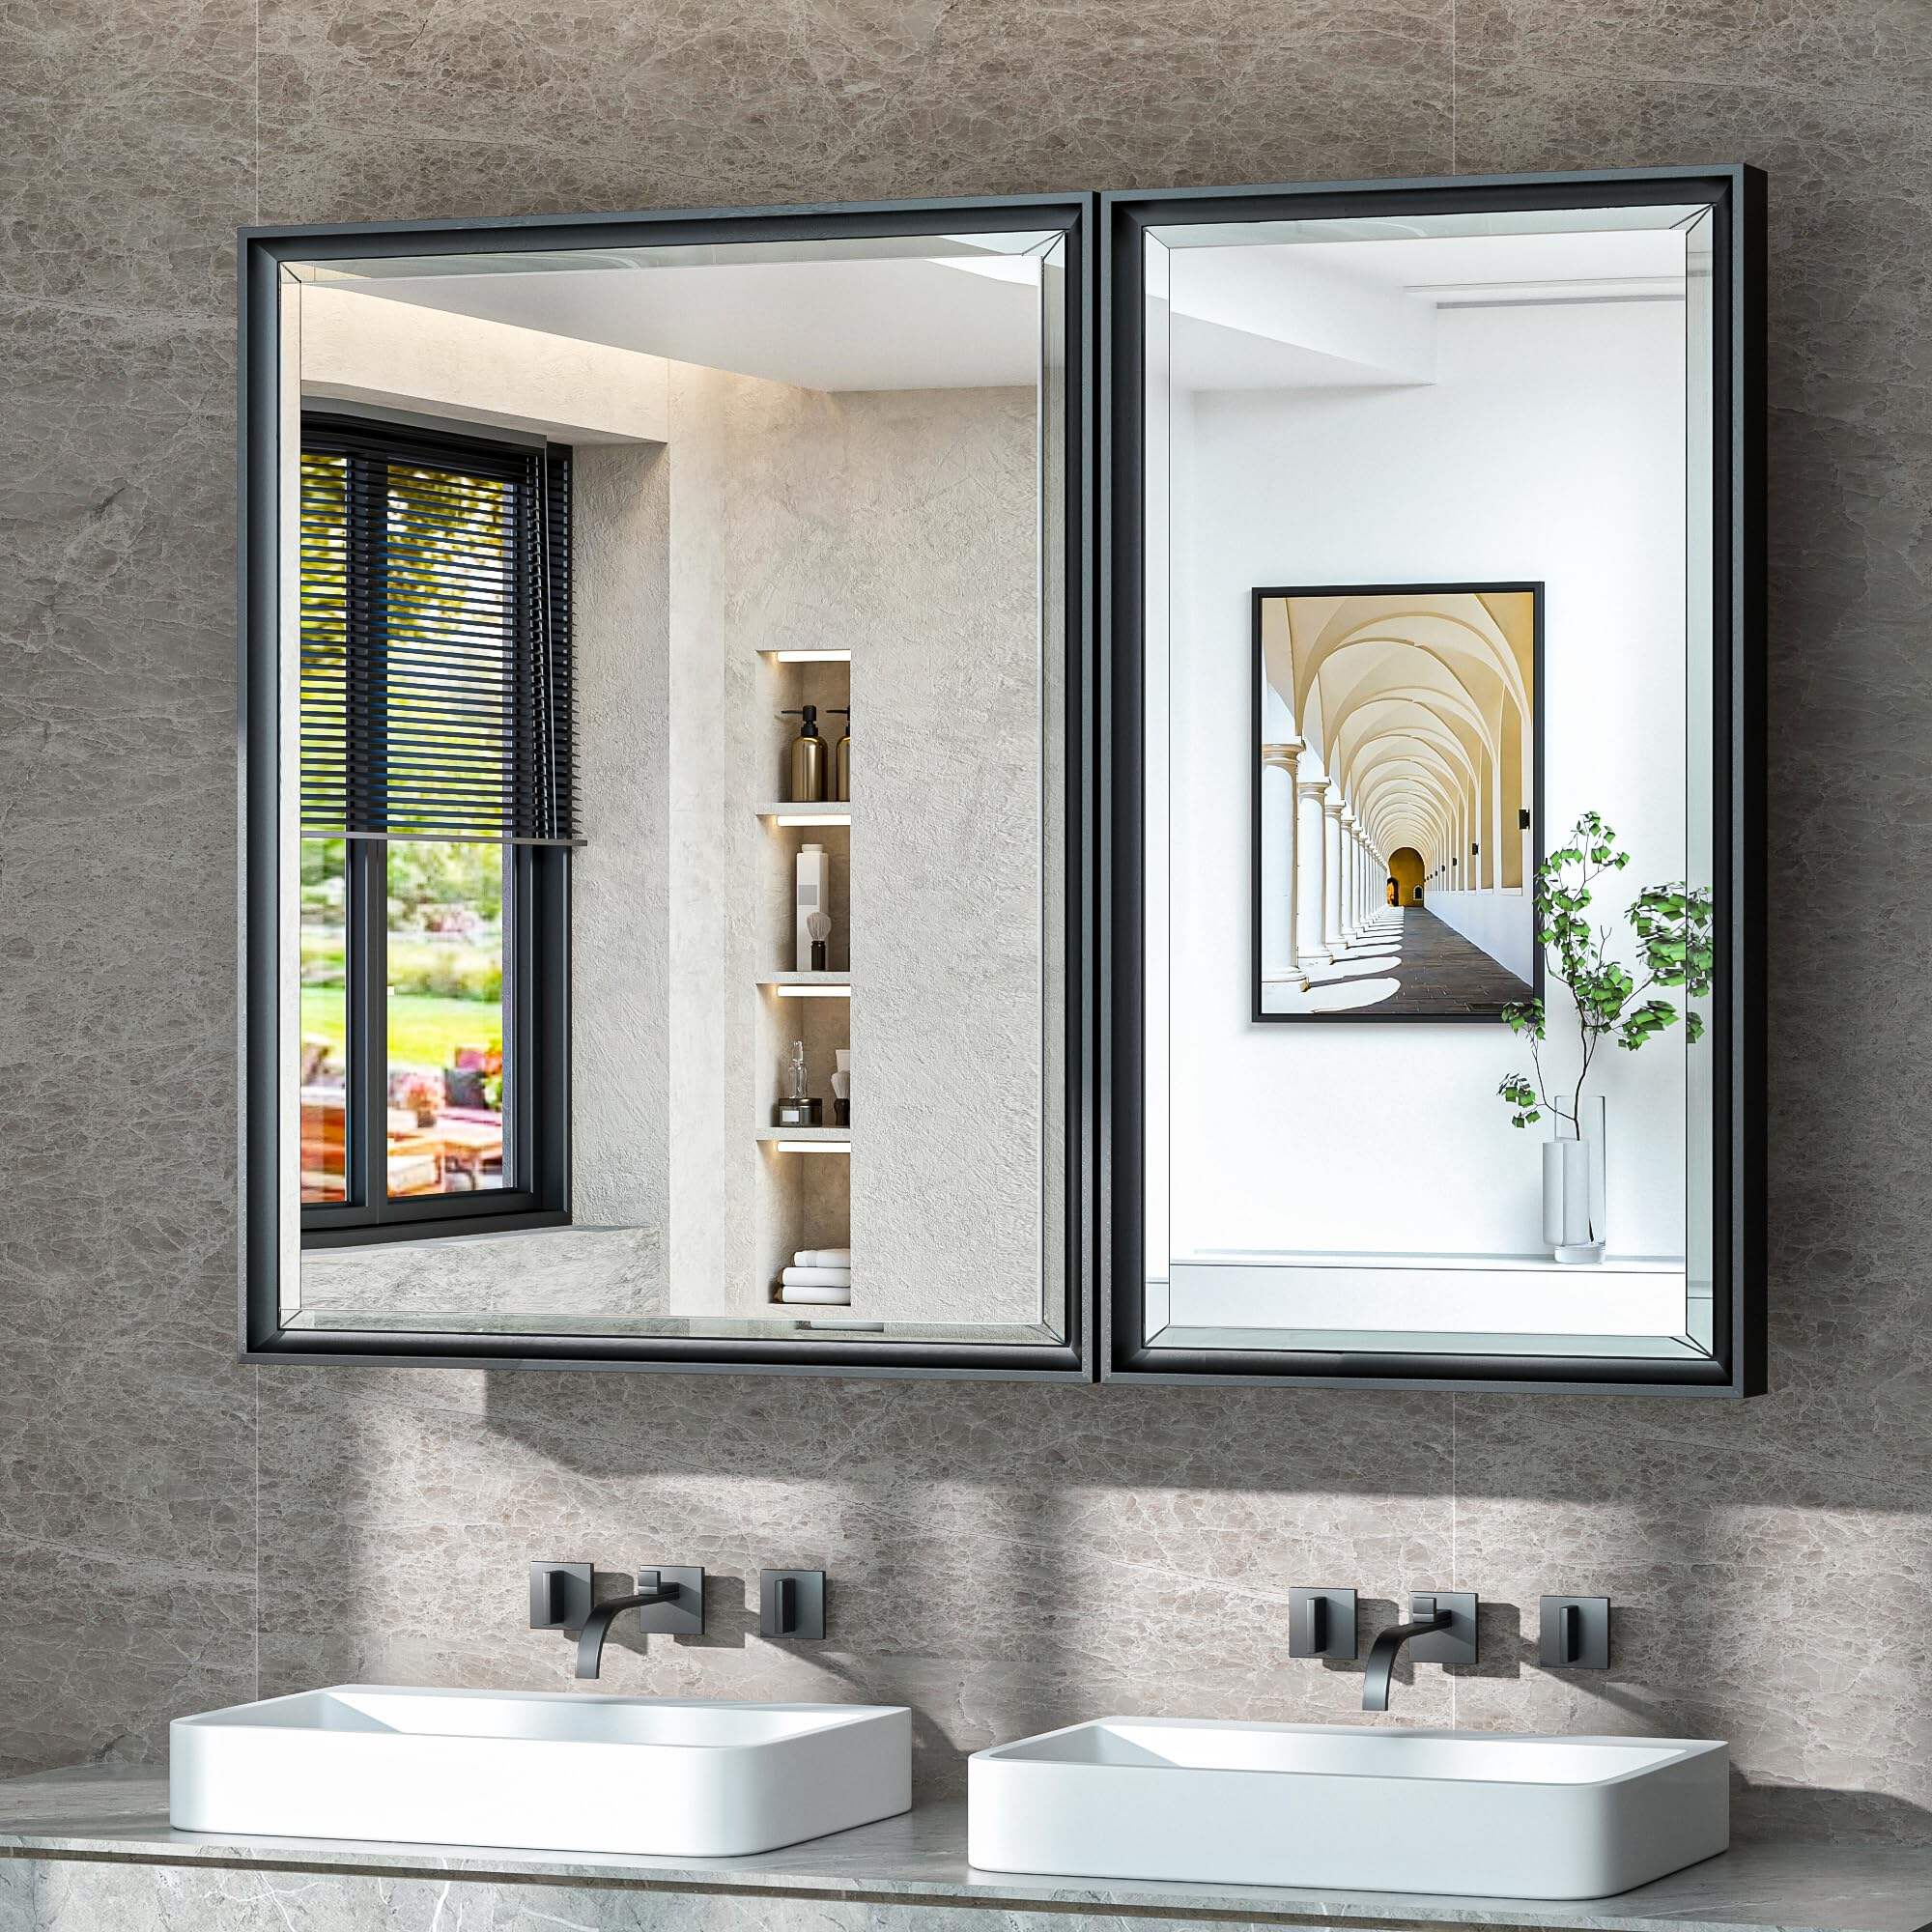 Foshan Haohan Smart Home Co., Ltd.  40x30 Medicine Cabinet Bathroom Vanity Mirror Black Metal Framed Recessed or Surface Wall Mounted with Aluminum Alloy Beveled Edges Design 2 Doors for Modern Farmhouse